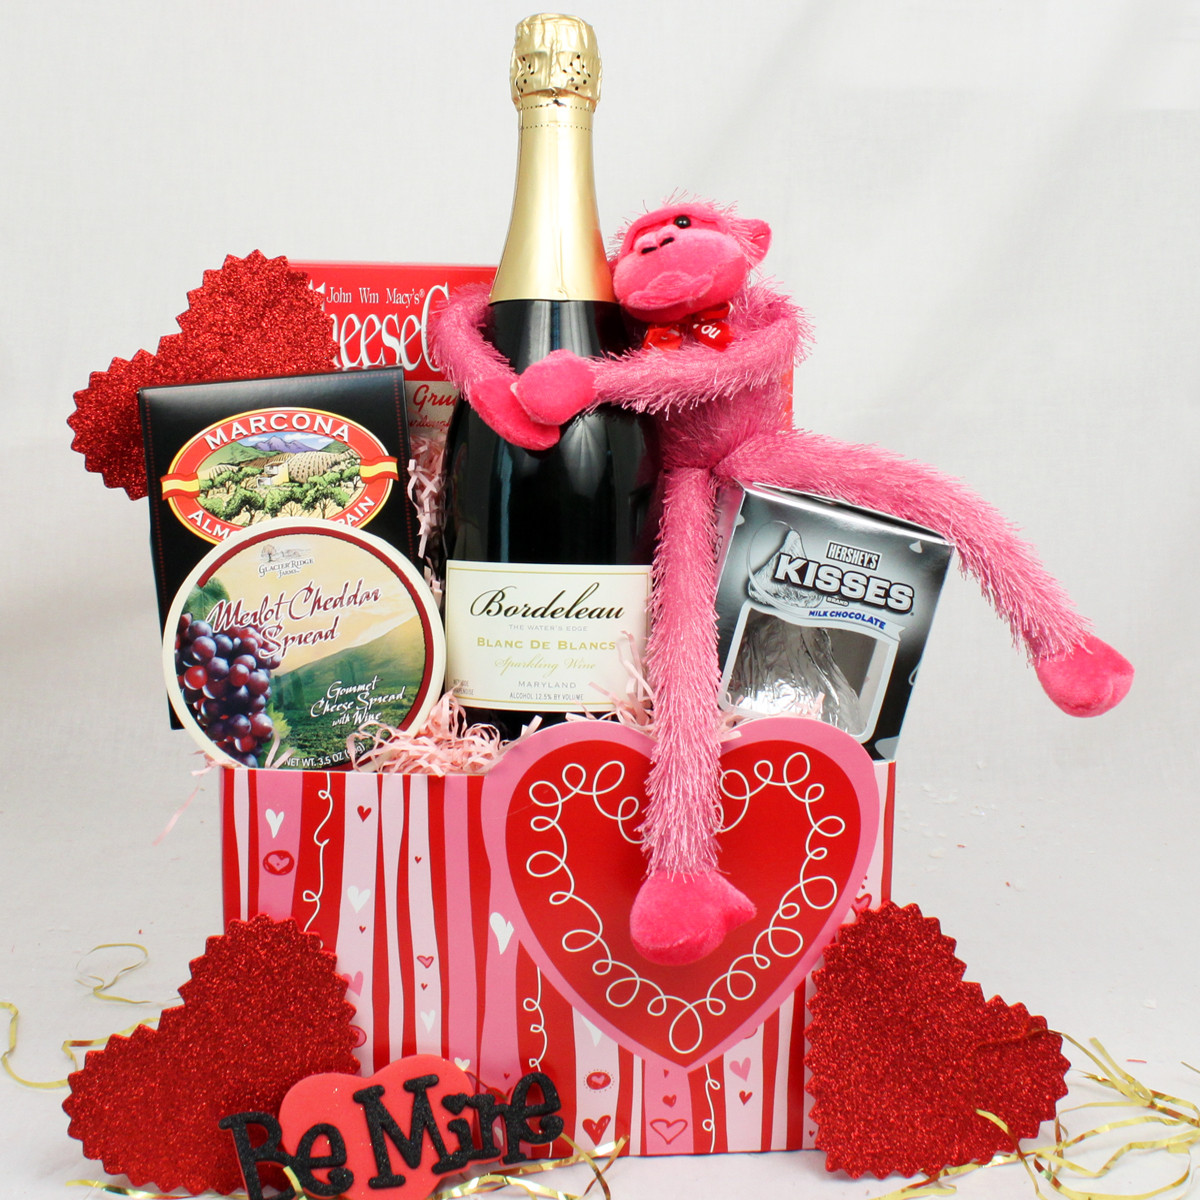 Gift Ideas For Her On Valentine'S Day
 Creative and Thoughtful Valentine’s Day Gifts for Her